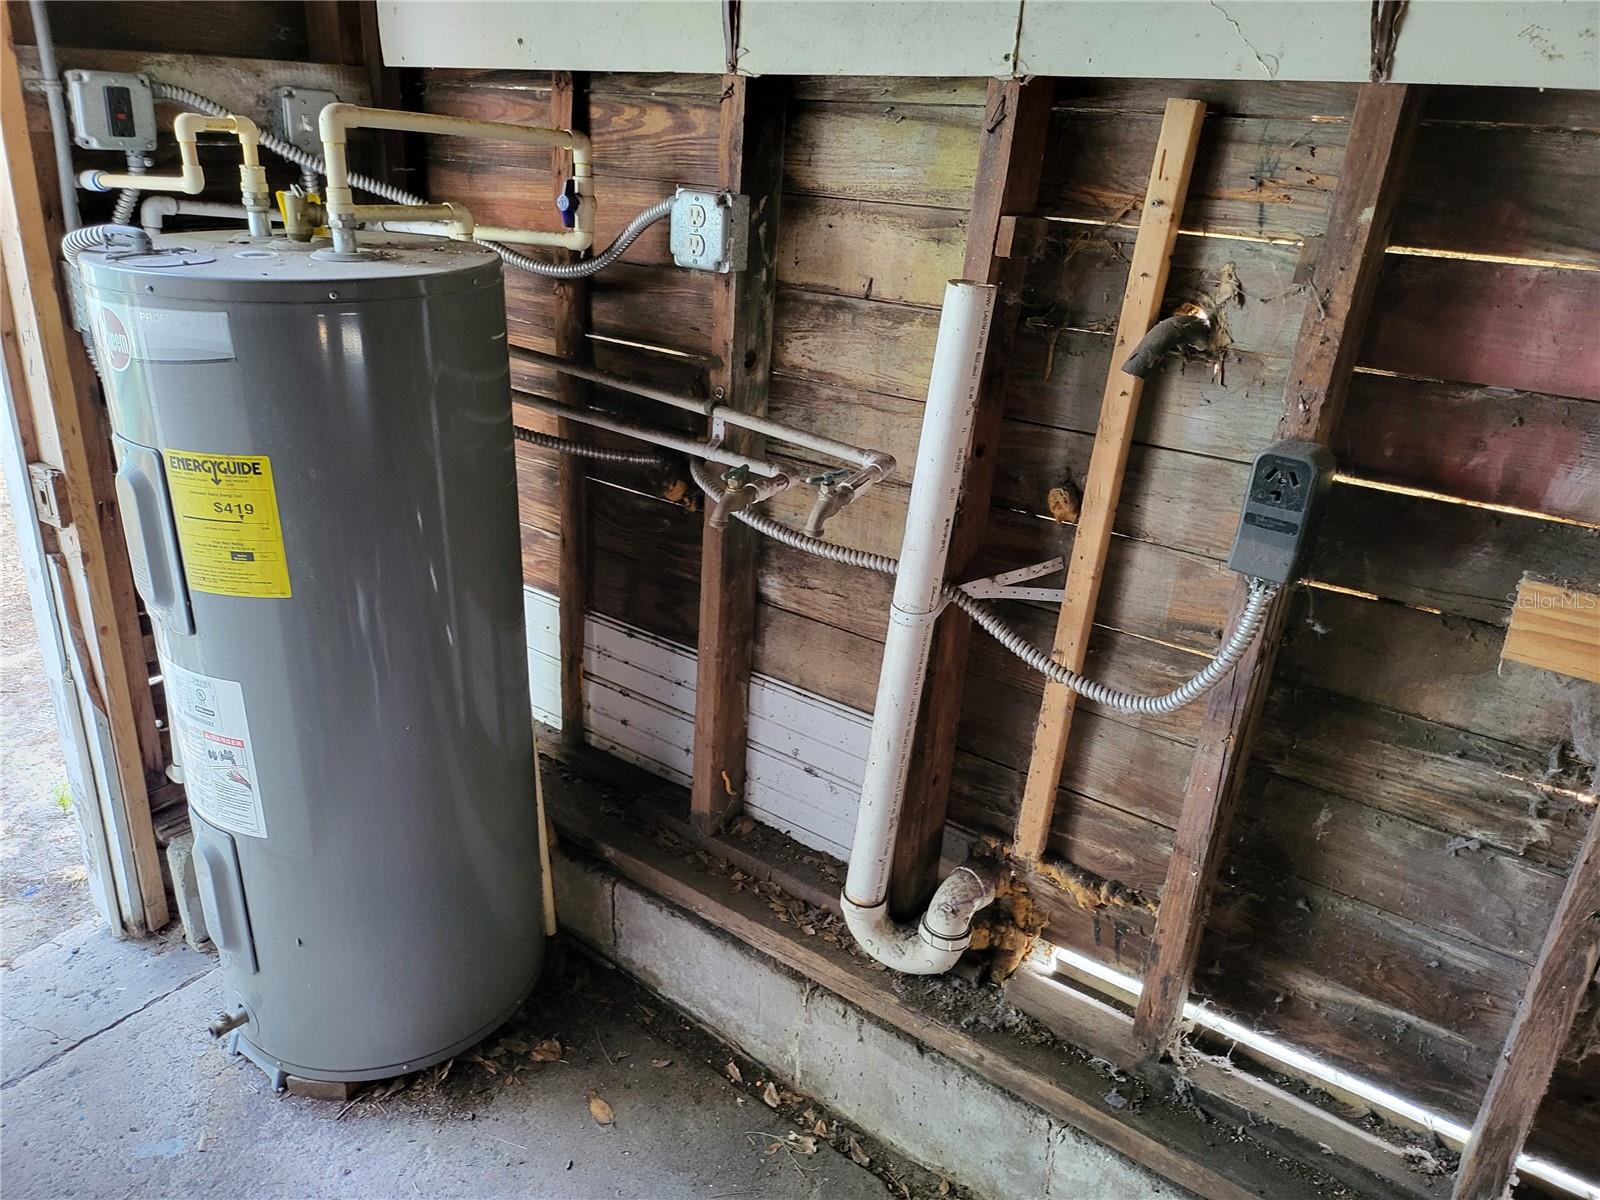 Hot water heater and washer/dryer hookups in garage